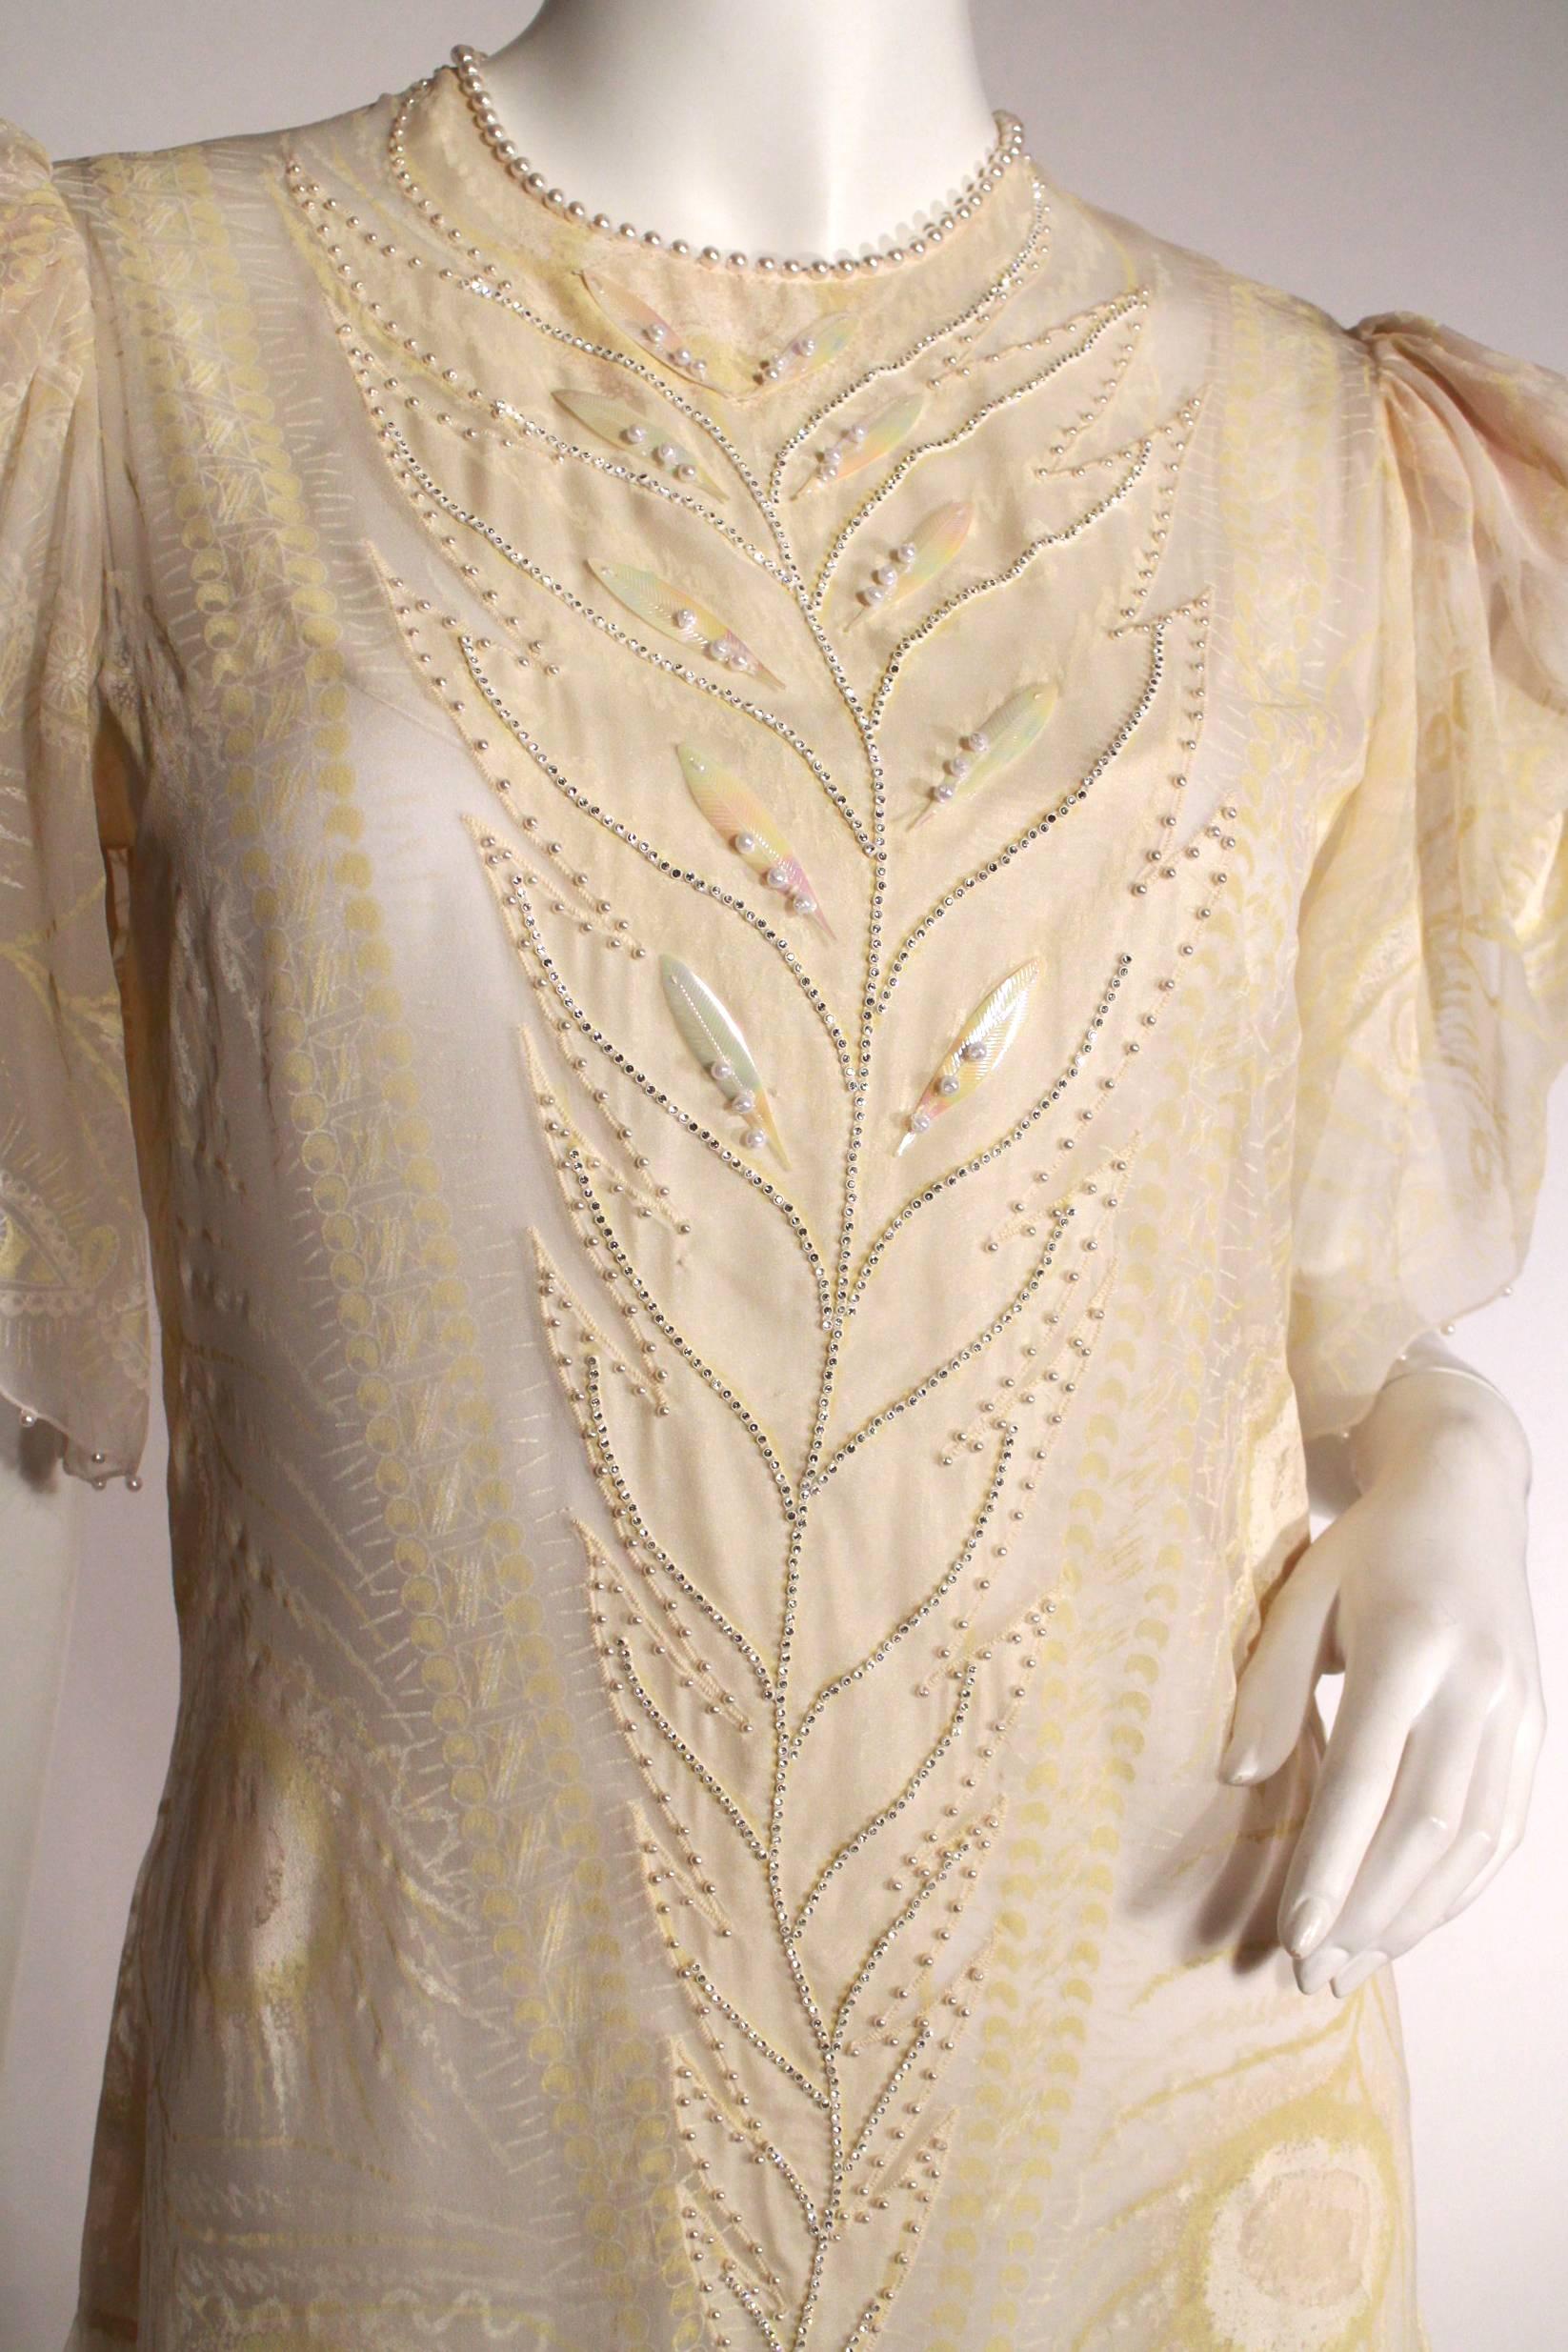 Just try not to strut in this stunning drop waist Zandra Rhodes dress in cream with hand-painted peacock feathers, pearl neckline, iridescent feather applique, petal puffed sleeves and scalloped hems. Excellent Condition.
Measurements:
Length 36